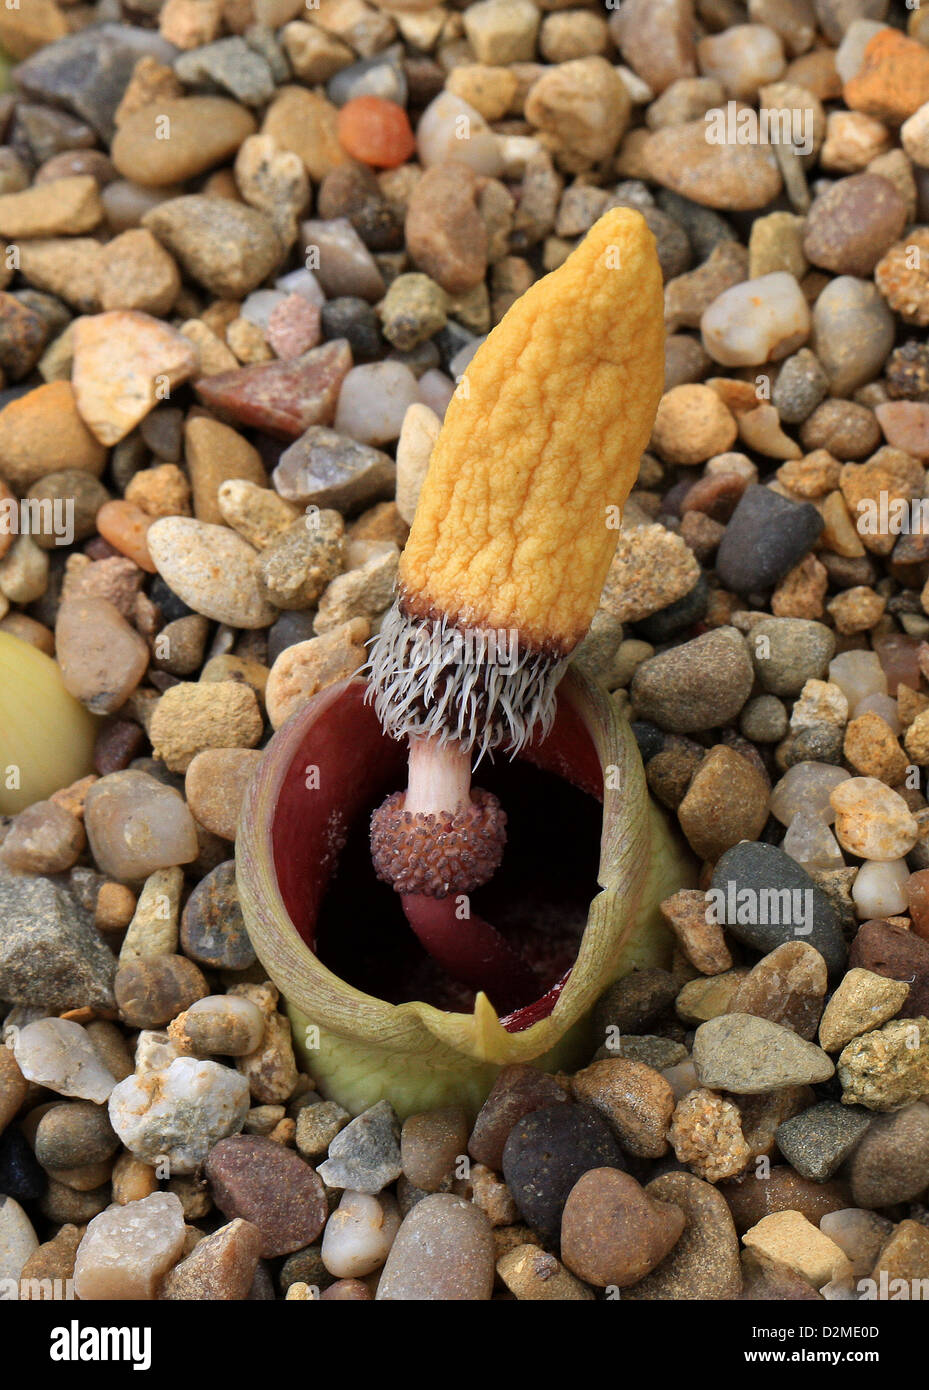 Biarum ditschianum, Araceae. Turkey. This is a relatively new plant species described only in 1989. Stock Photo